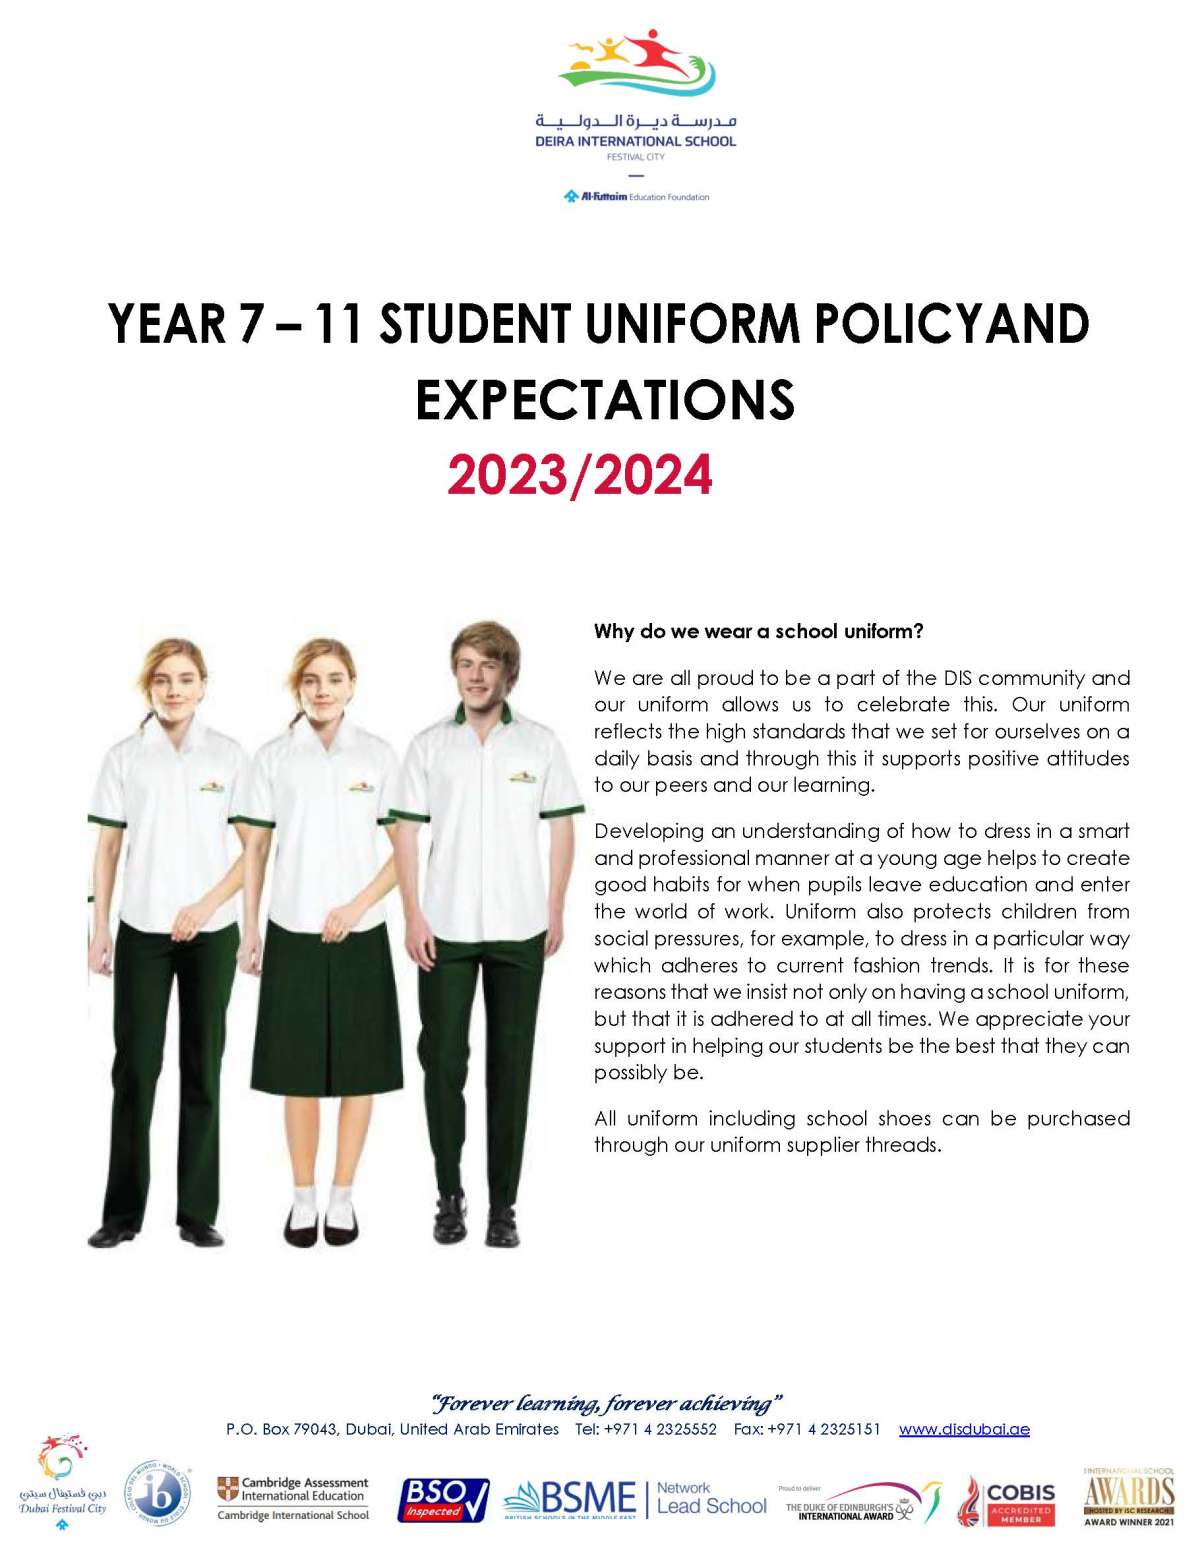 Uniform Policy 23 - 24 new_Page_1